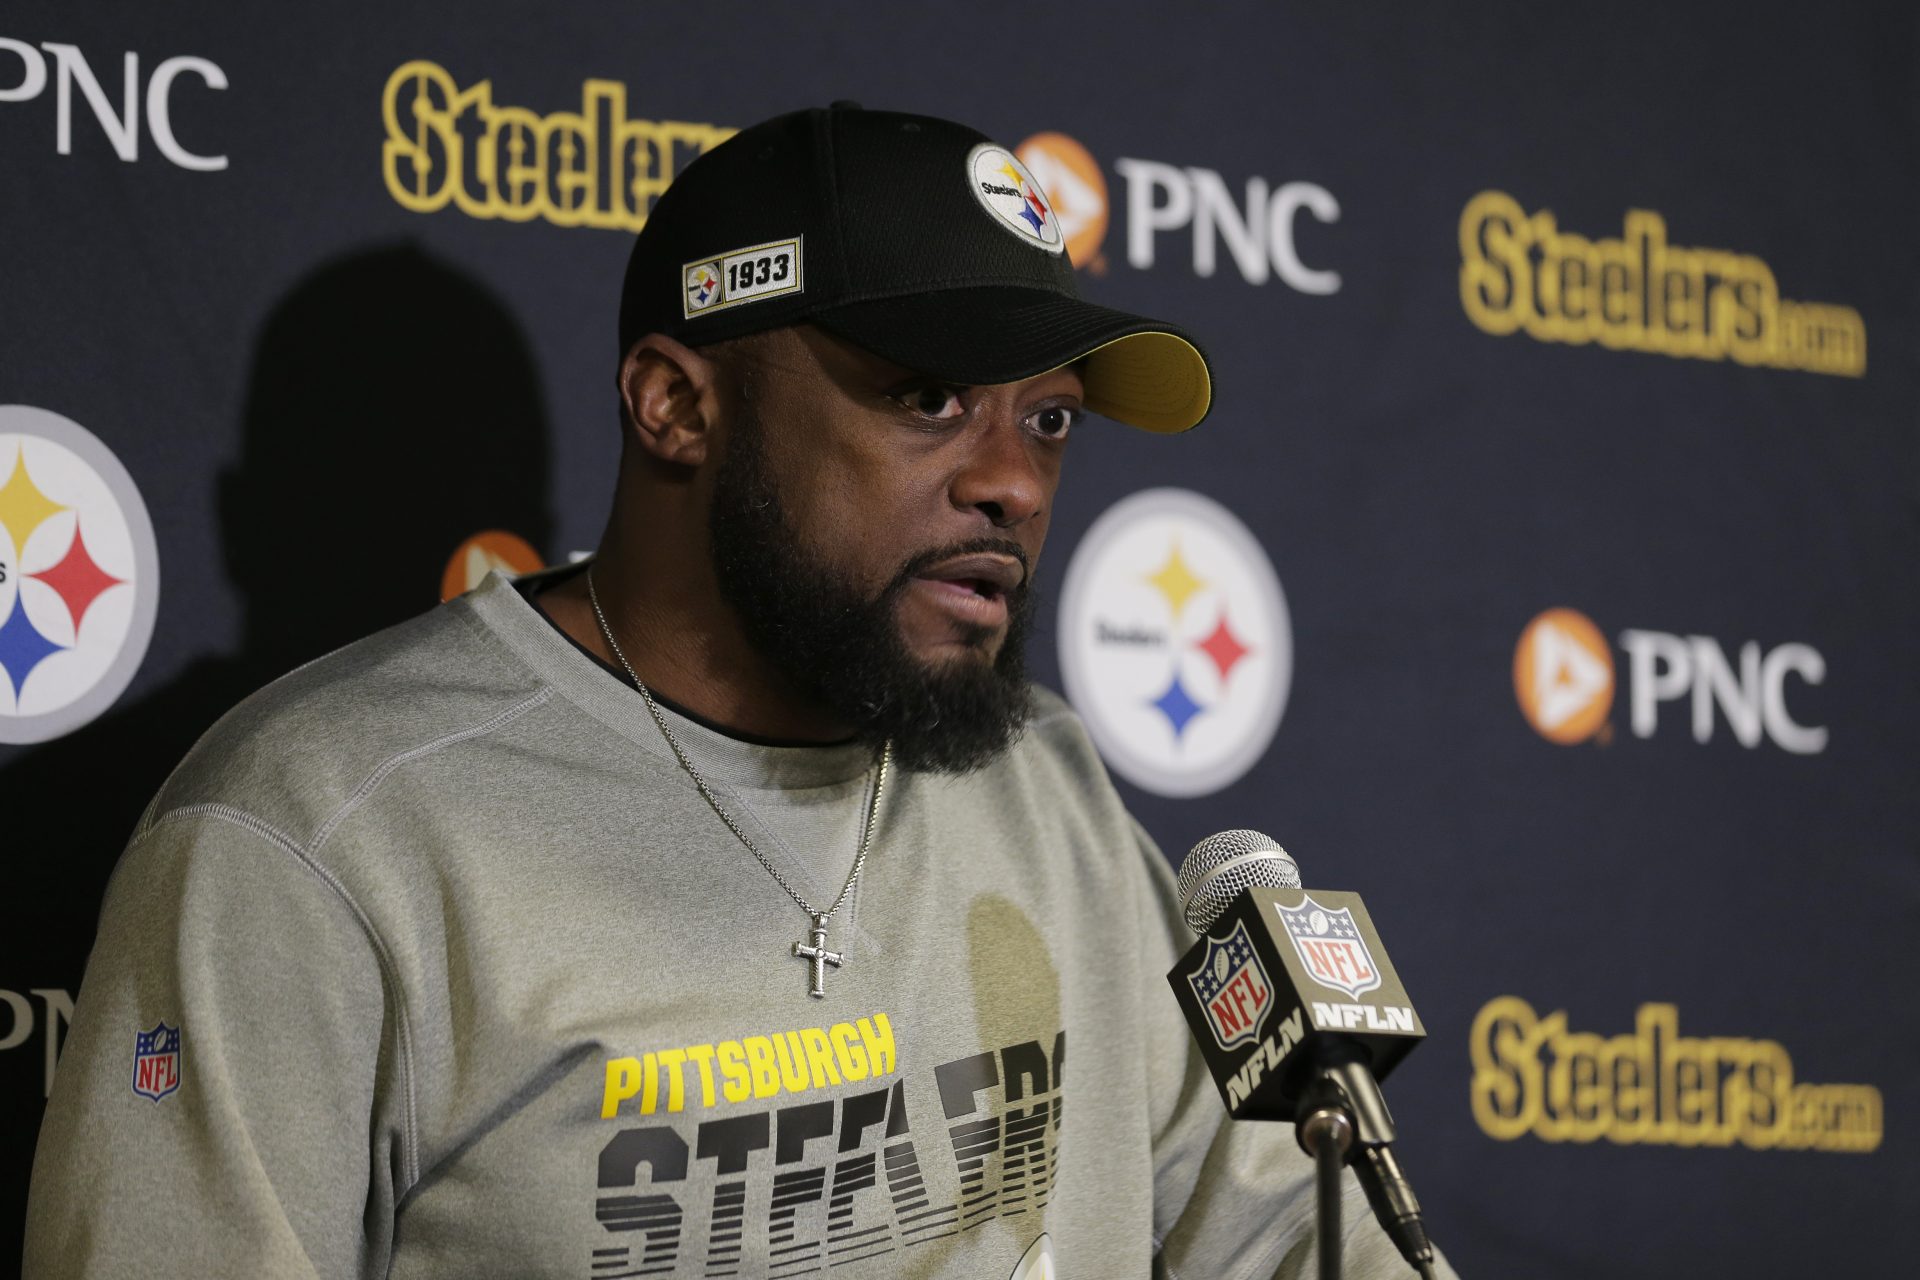 Pittsburgh Steelers head coach Mike Tomlin talks during a post game news conference after an NFL football game against the New York Jets, Sunday, Dec. 22, 2019, in East Rutherford, N.J.